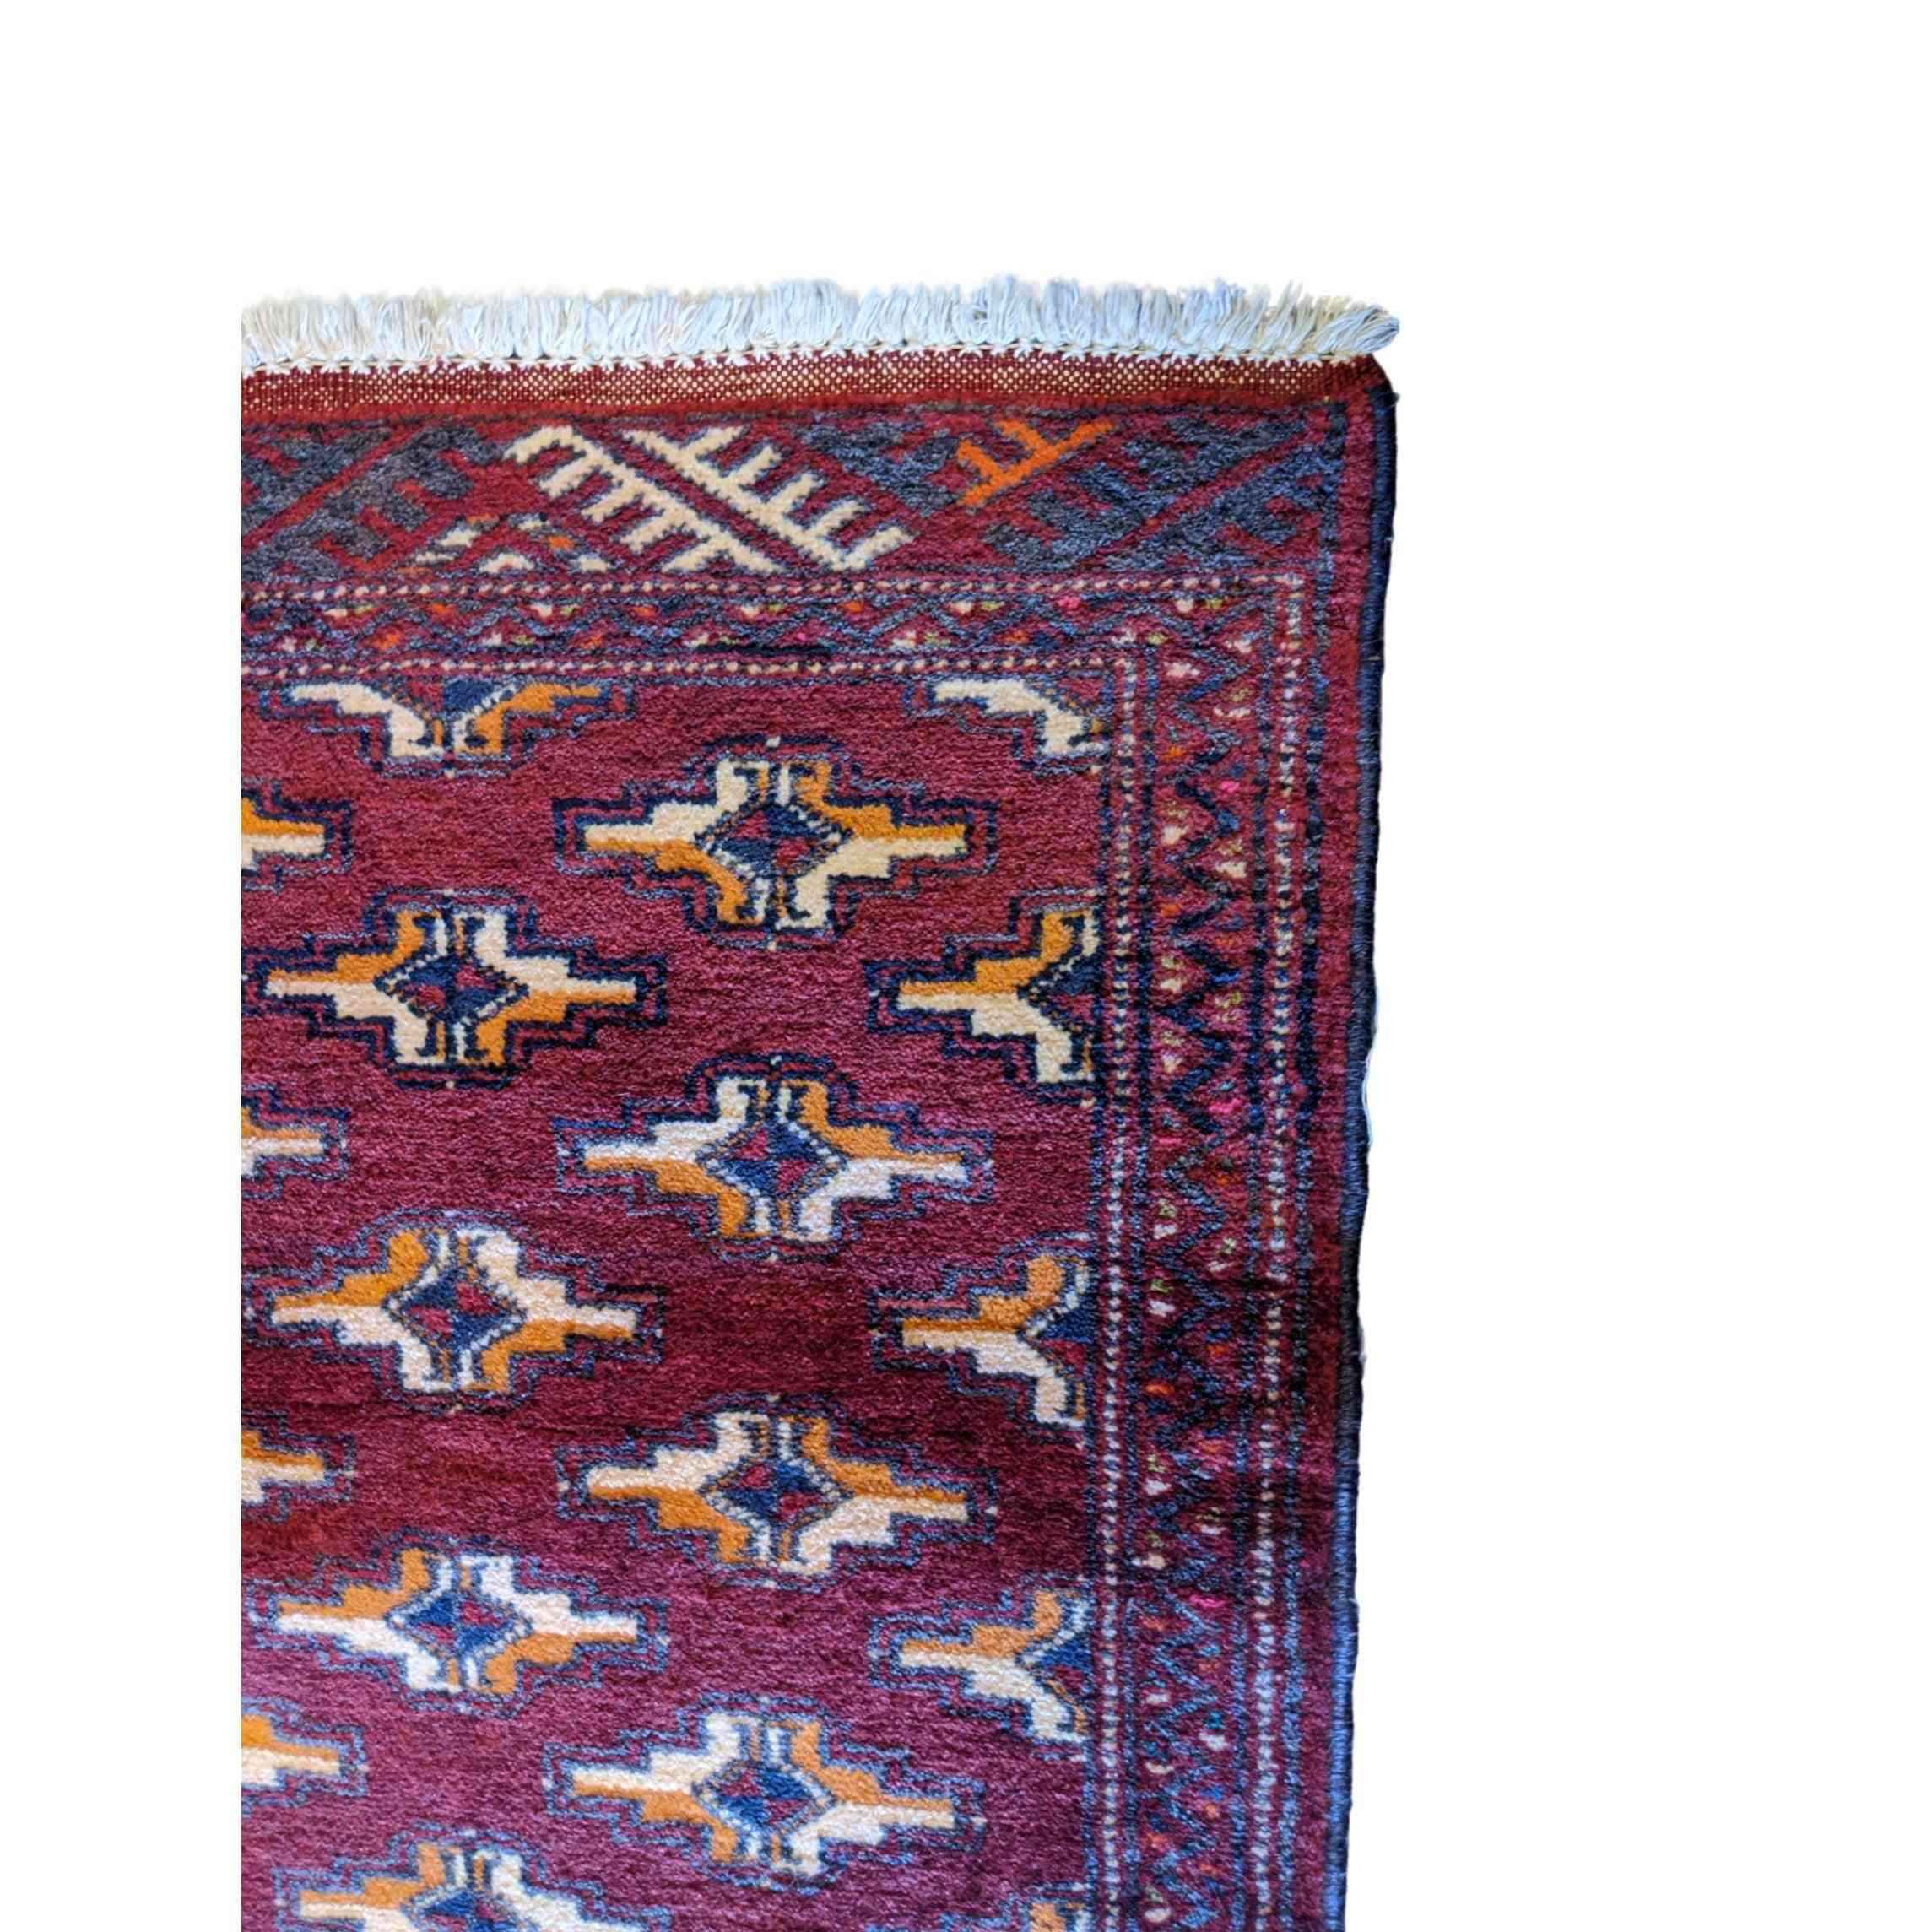 110 x 50 cm Persian Baluch Traditional Red Rug - Rugmaster